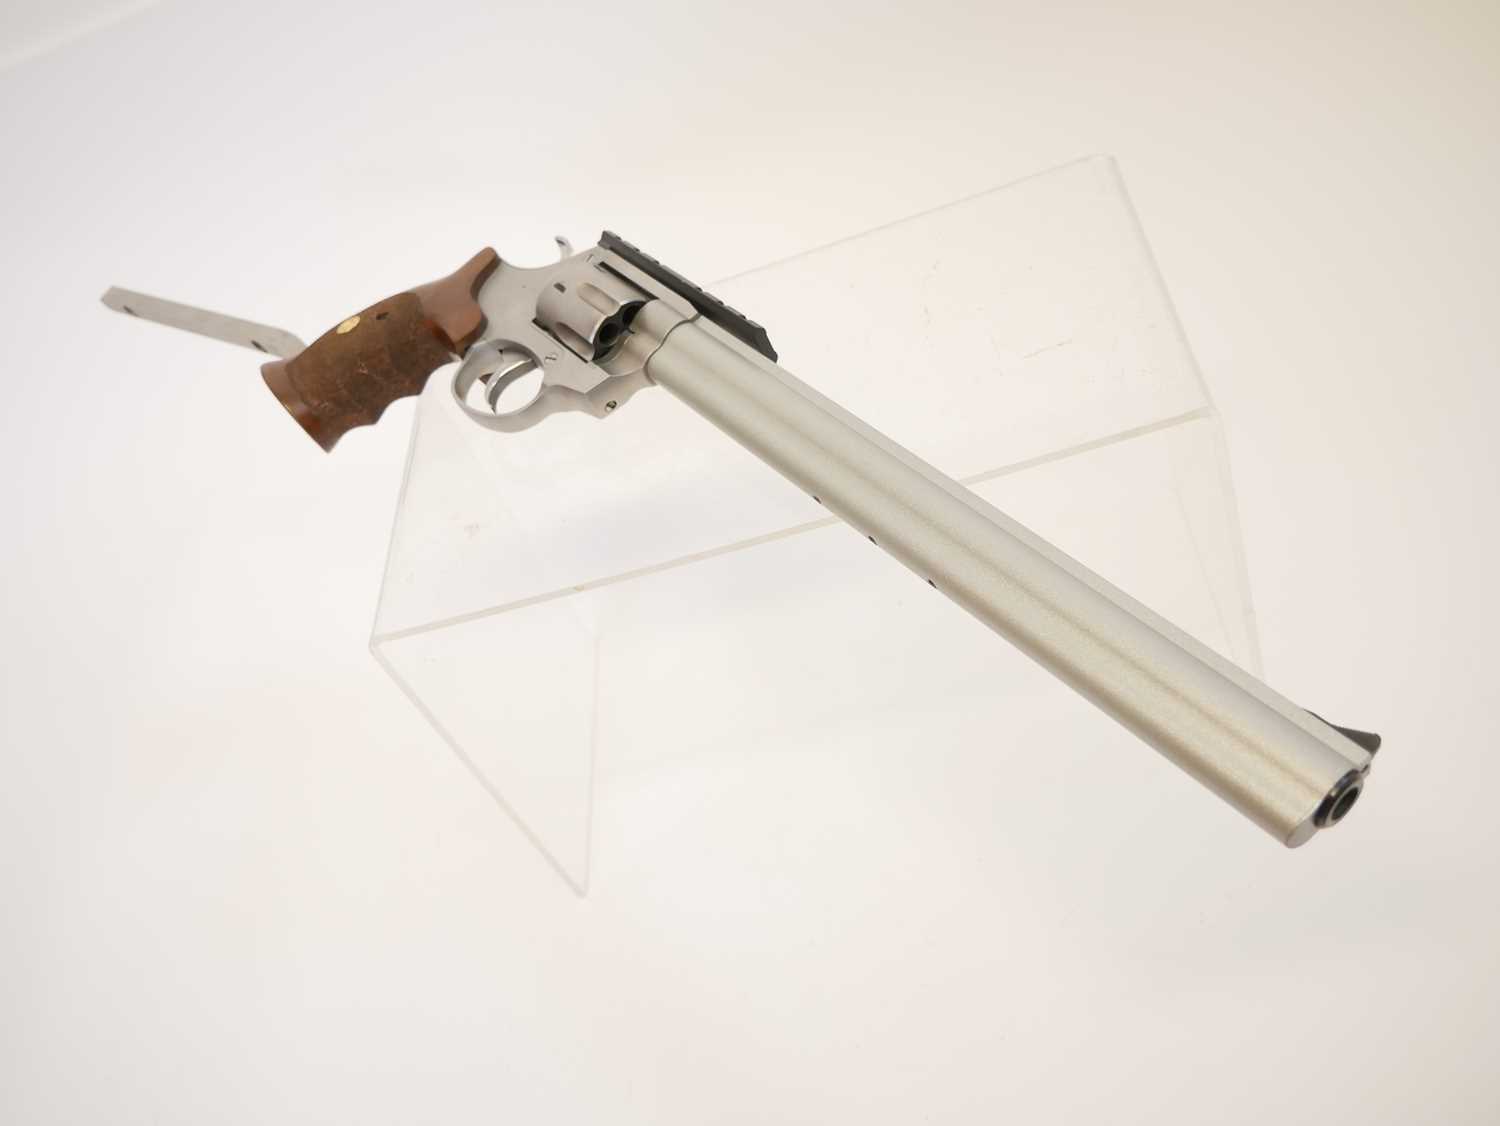 Alfa Brno .357 long barrel revolver, serial number 7351200627, 12 inch barrel, fitted with Picatinny - Image 10 of 13